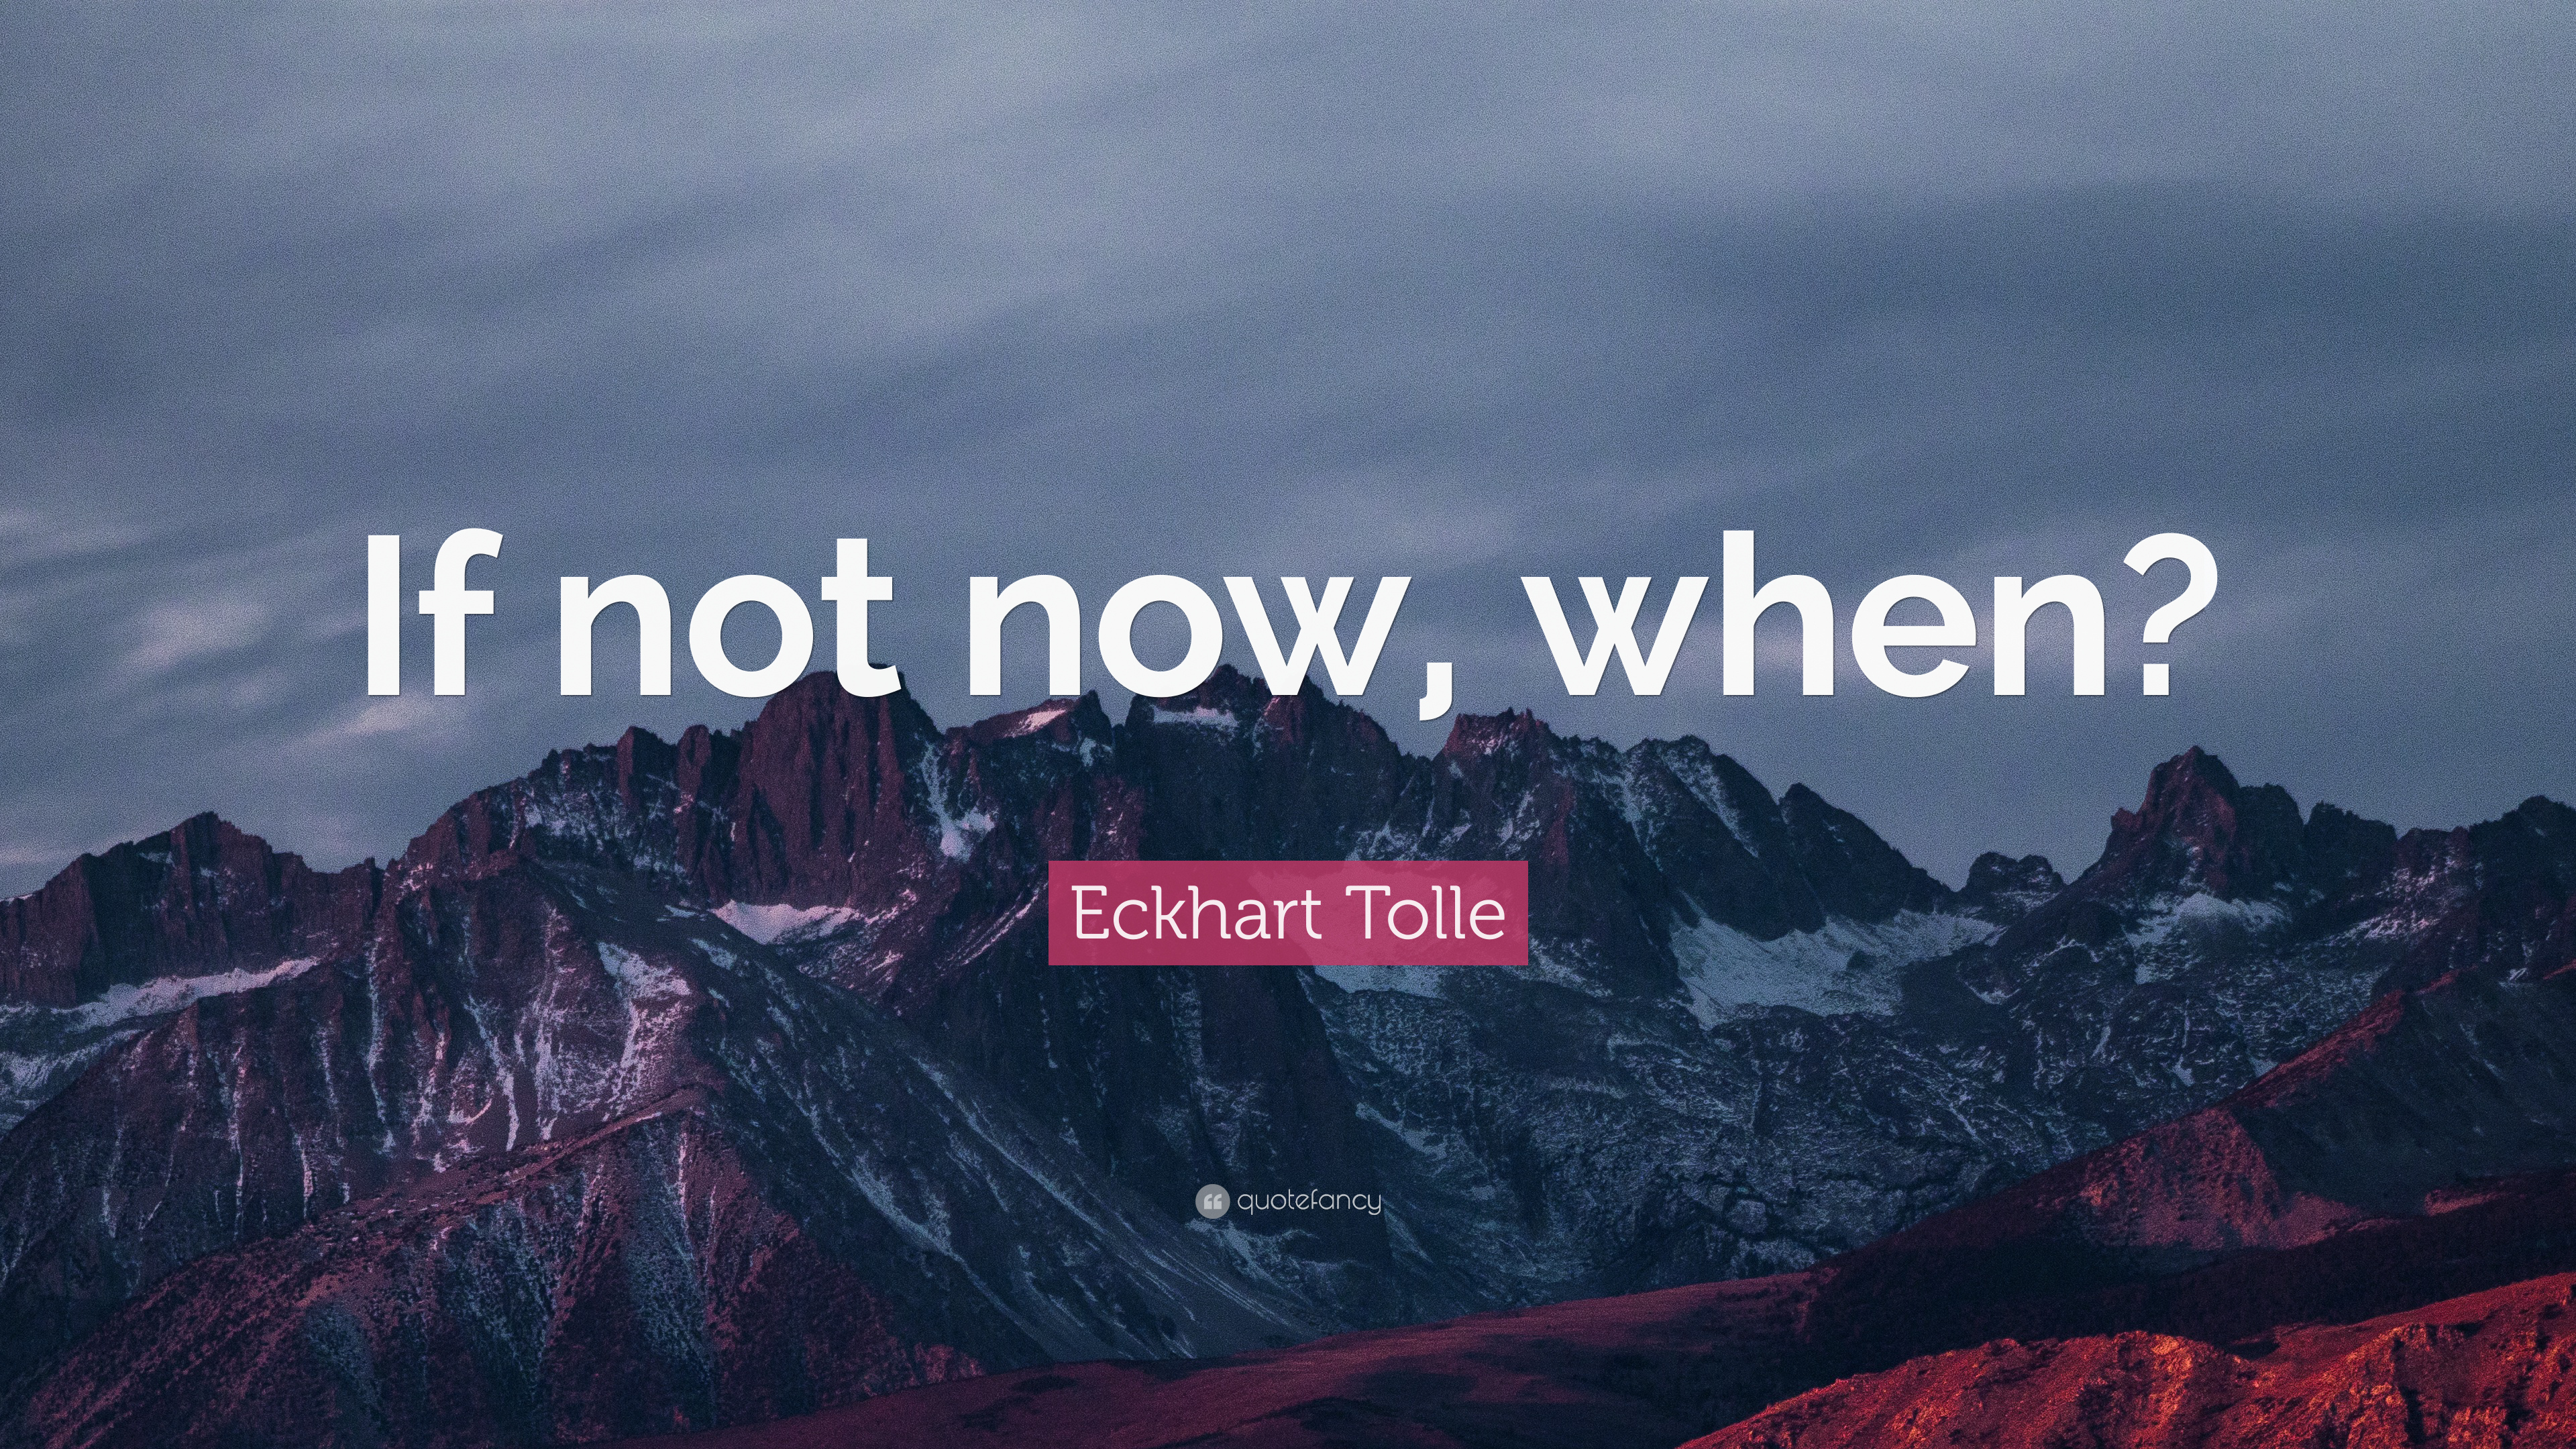 Eckhart Tolle Quote: “If not now, when?”